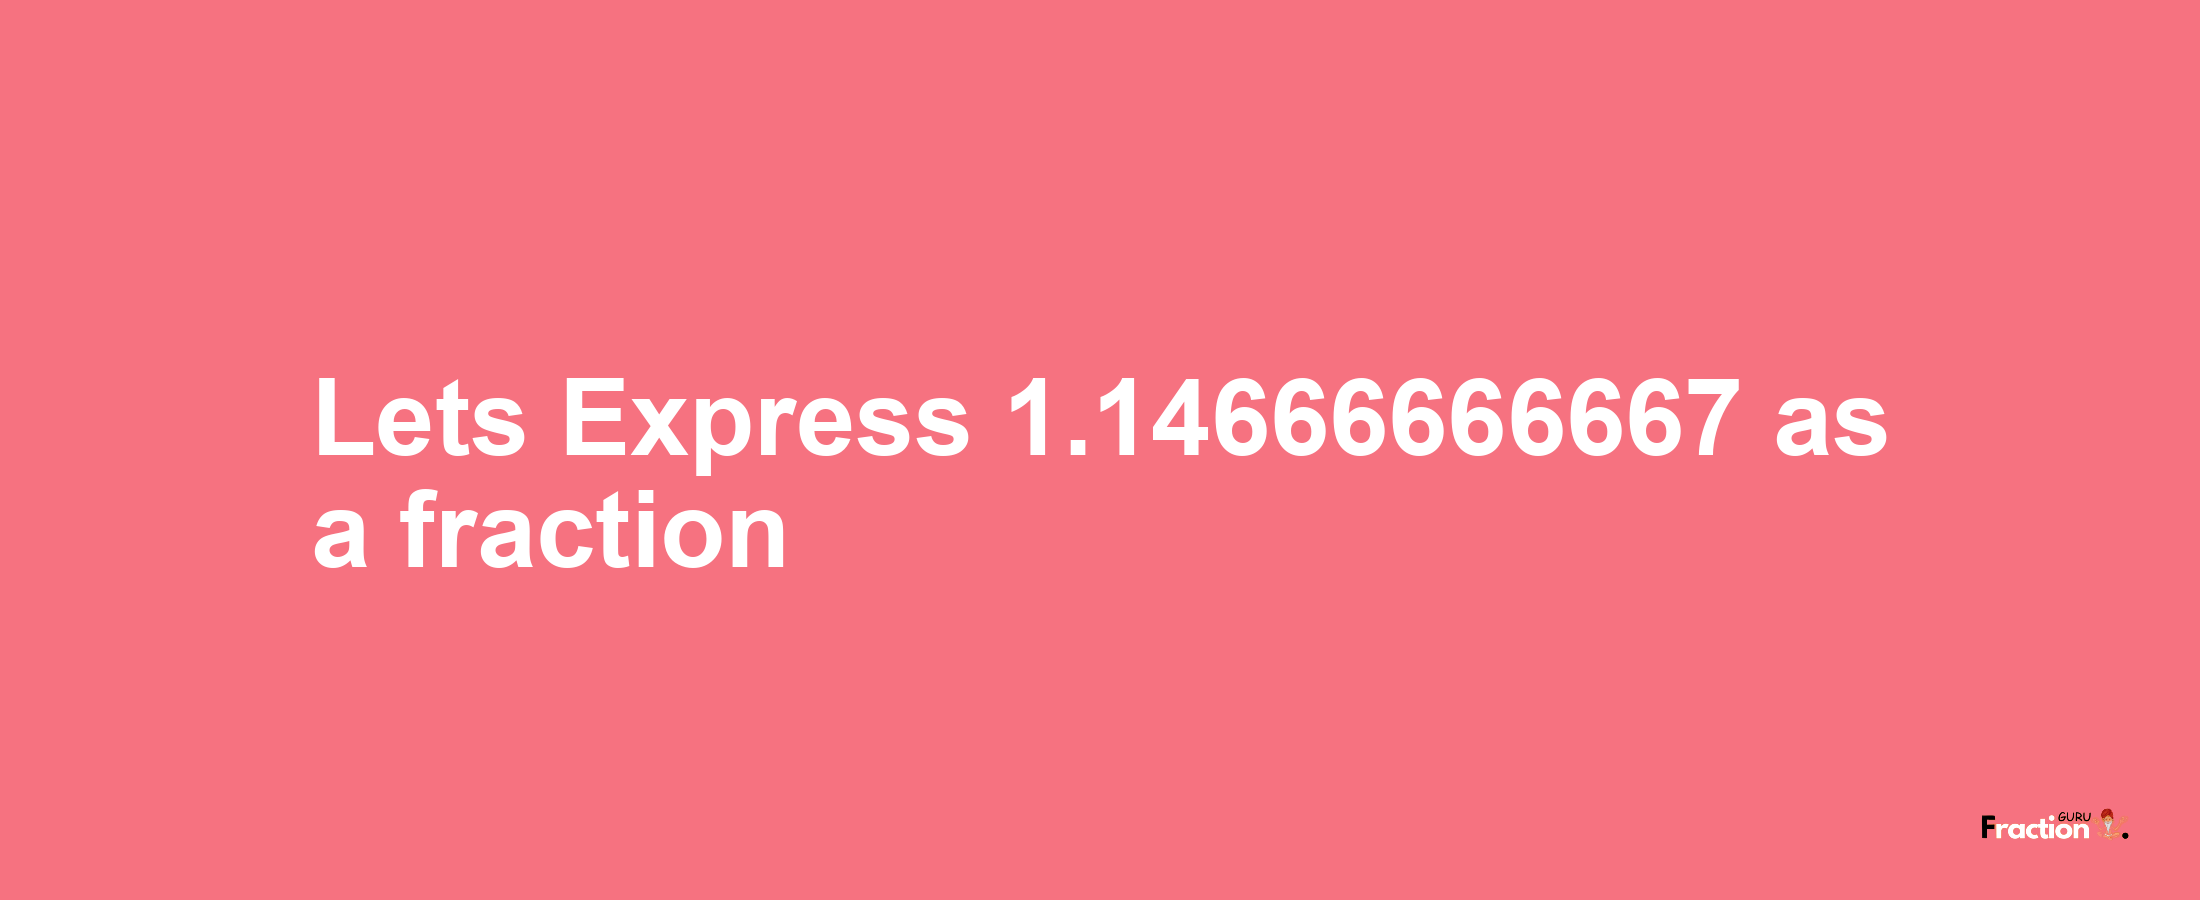 Lets Express 1.14666666667 as afraction